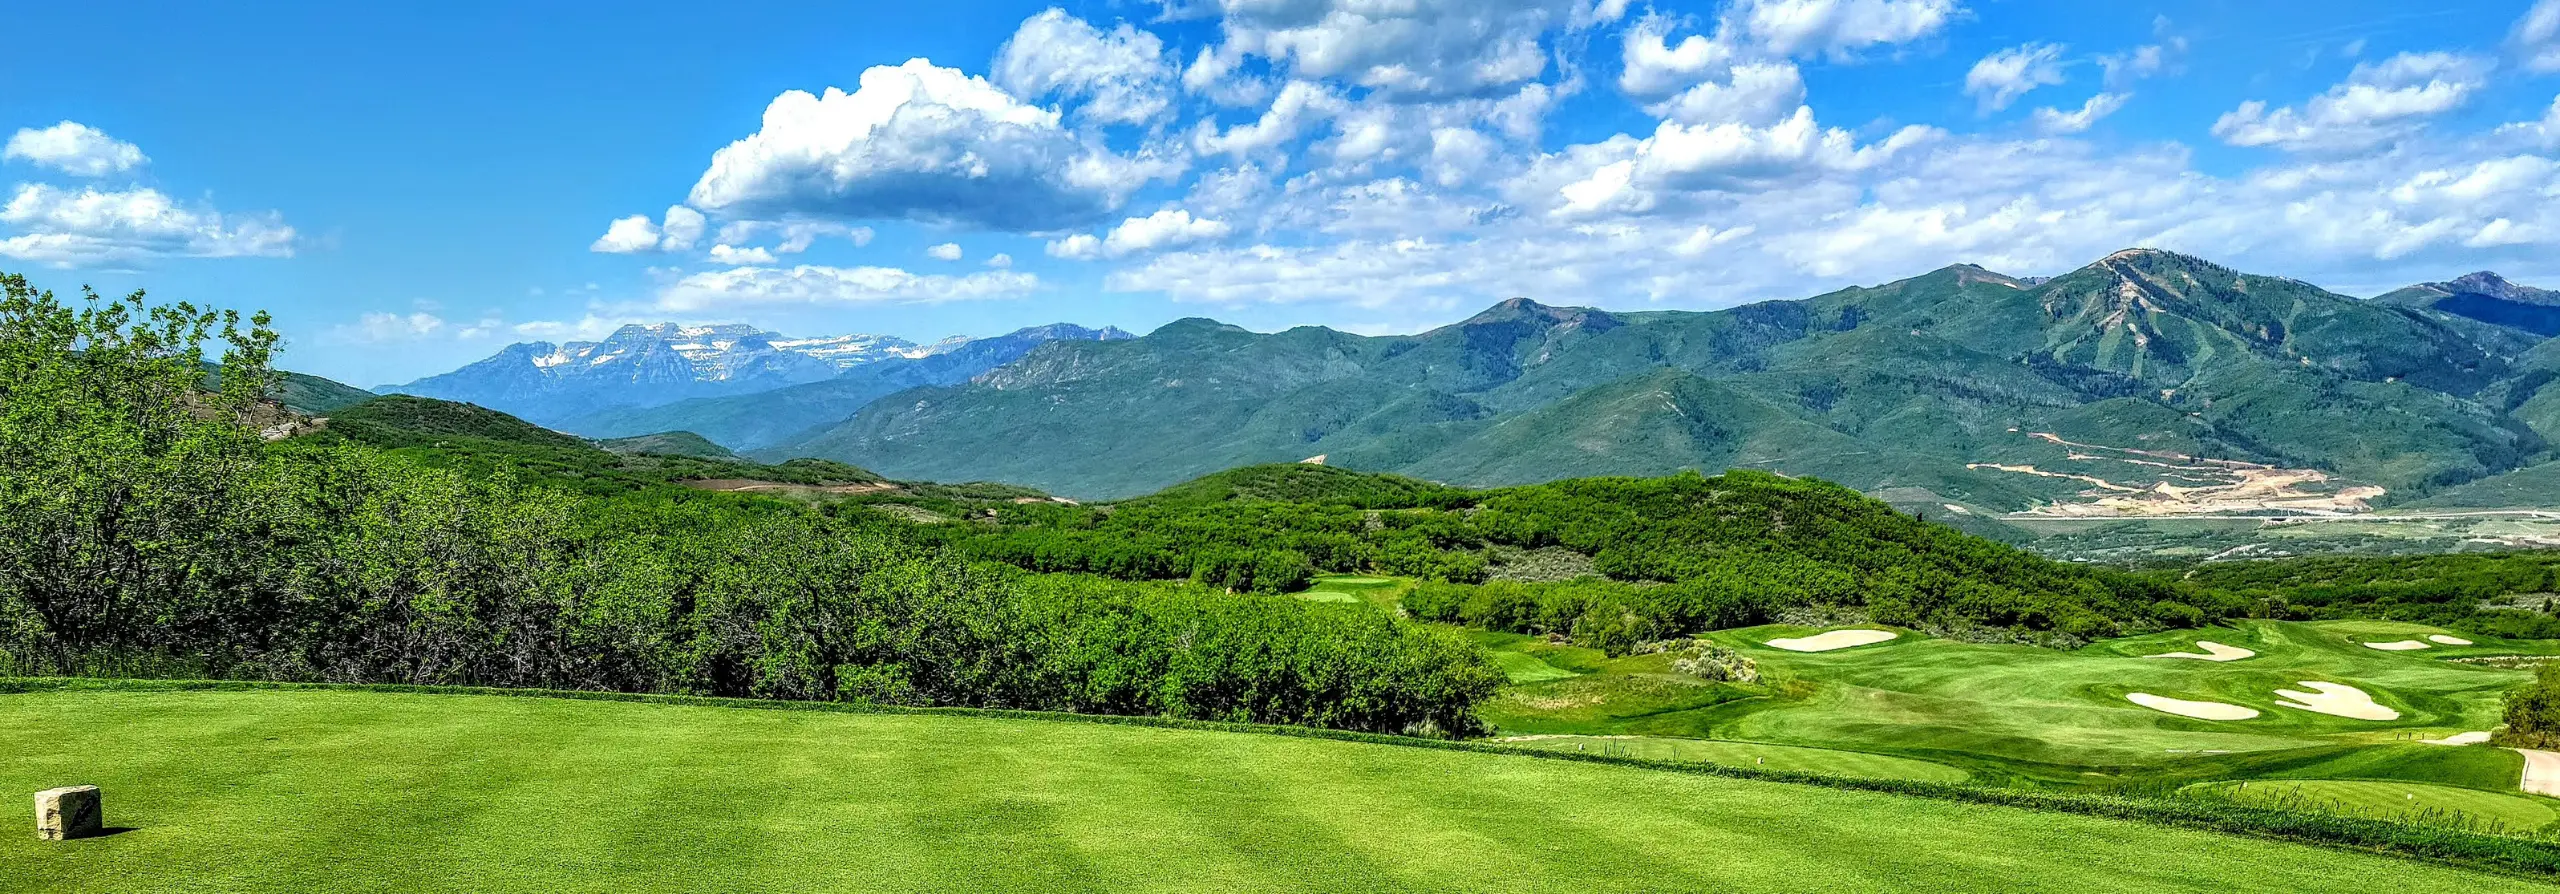 View of Tuhaye golf community with mountain ranges in the background.